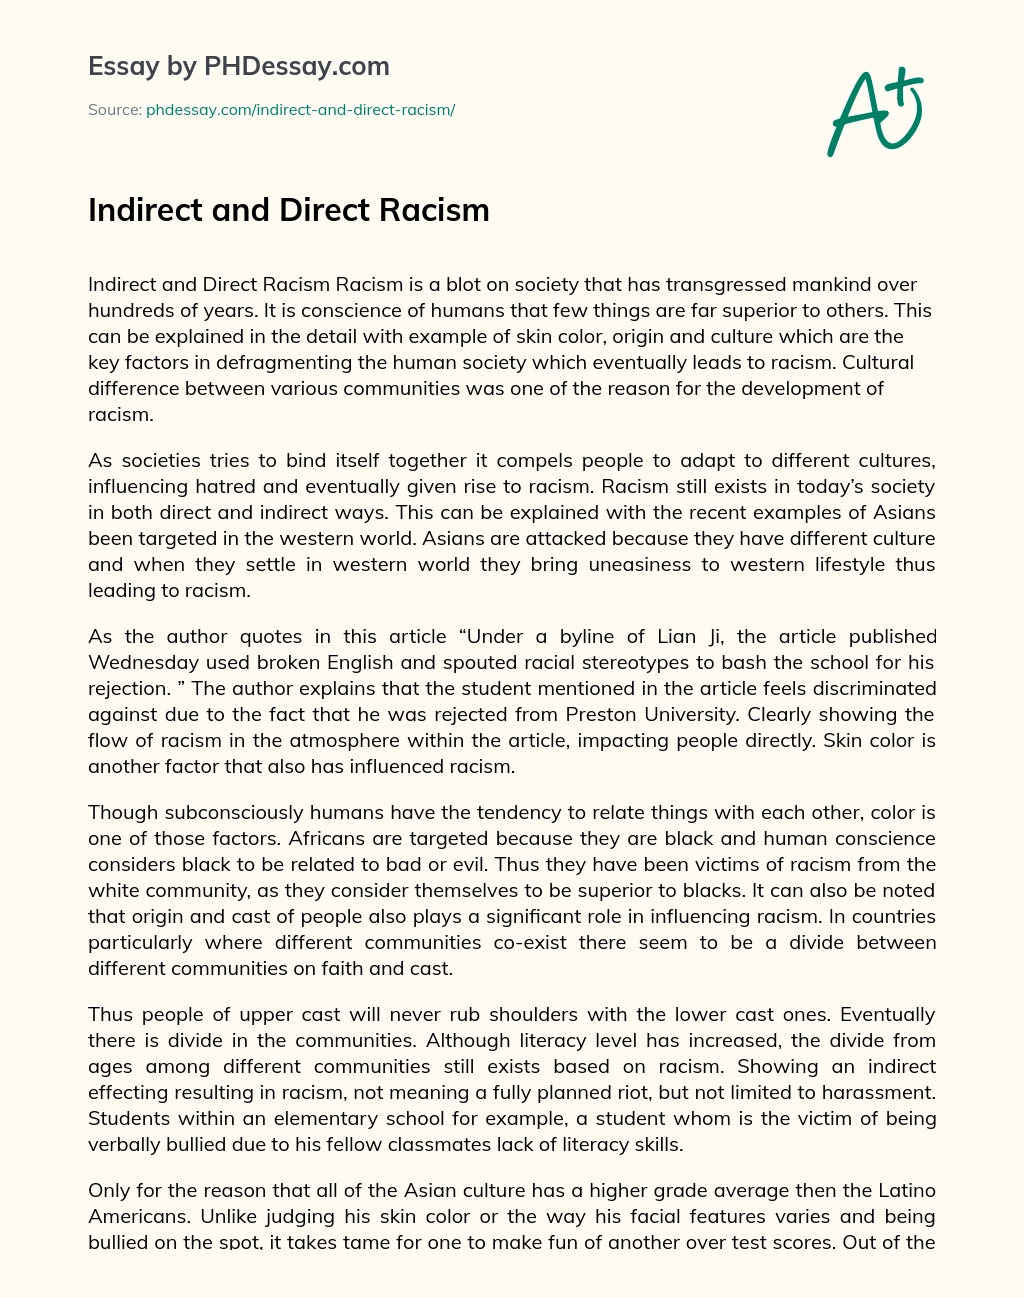 Indirect and Direct Racism essay